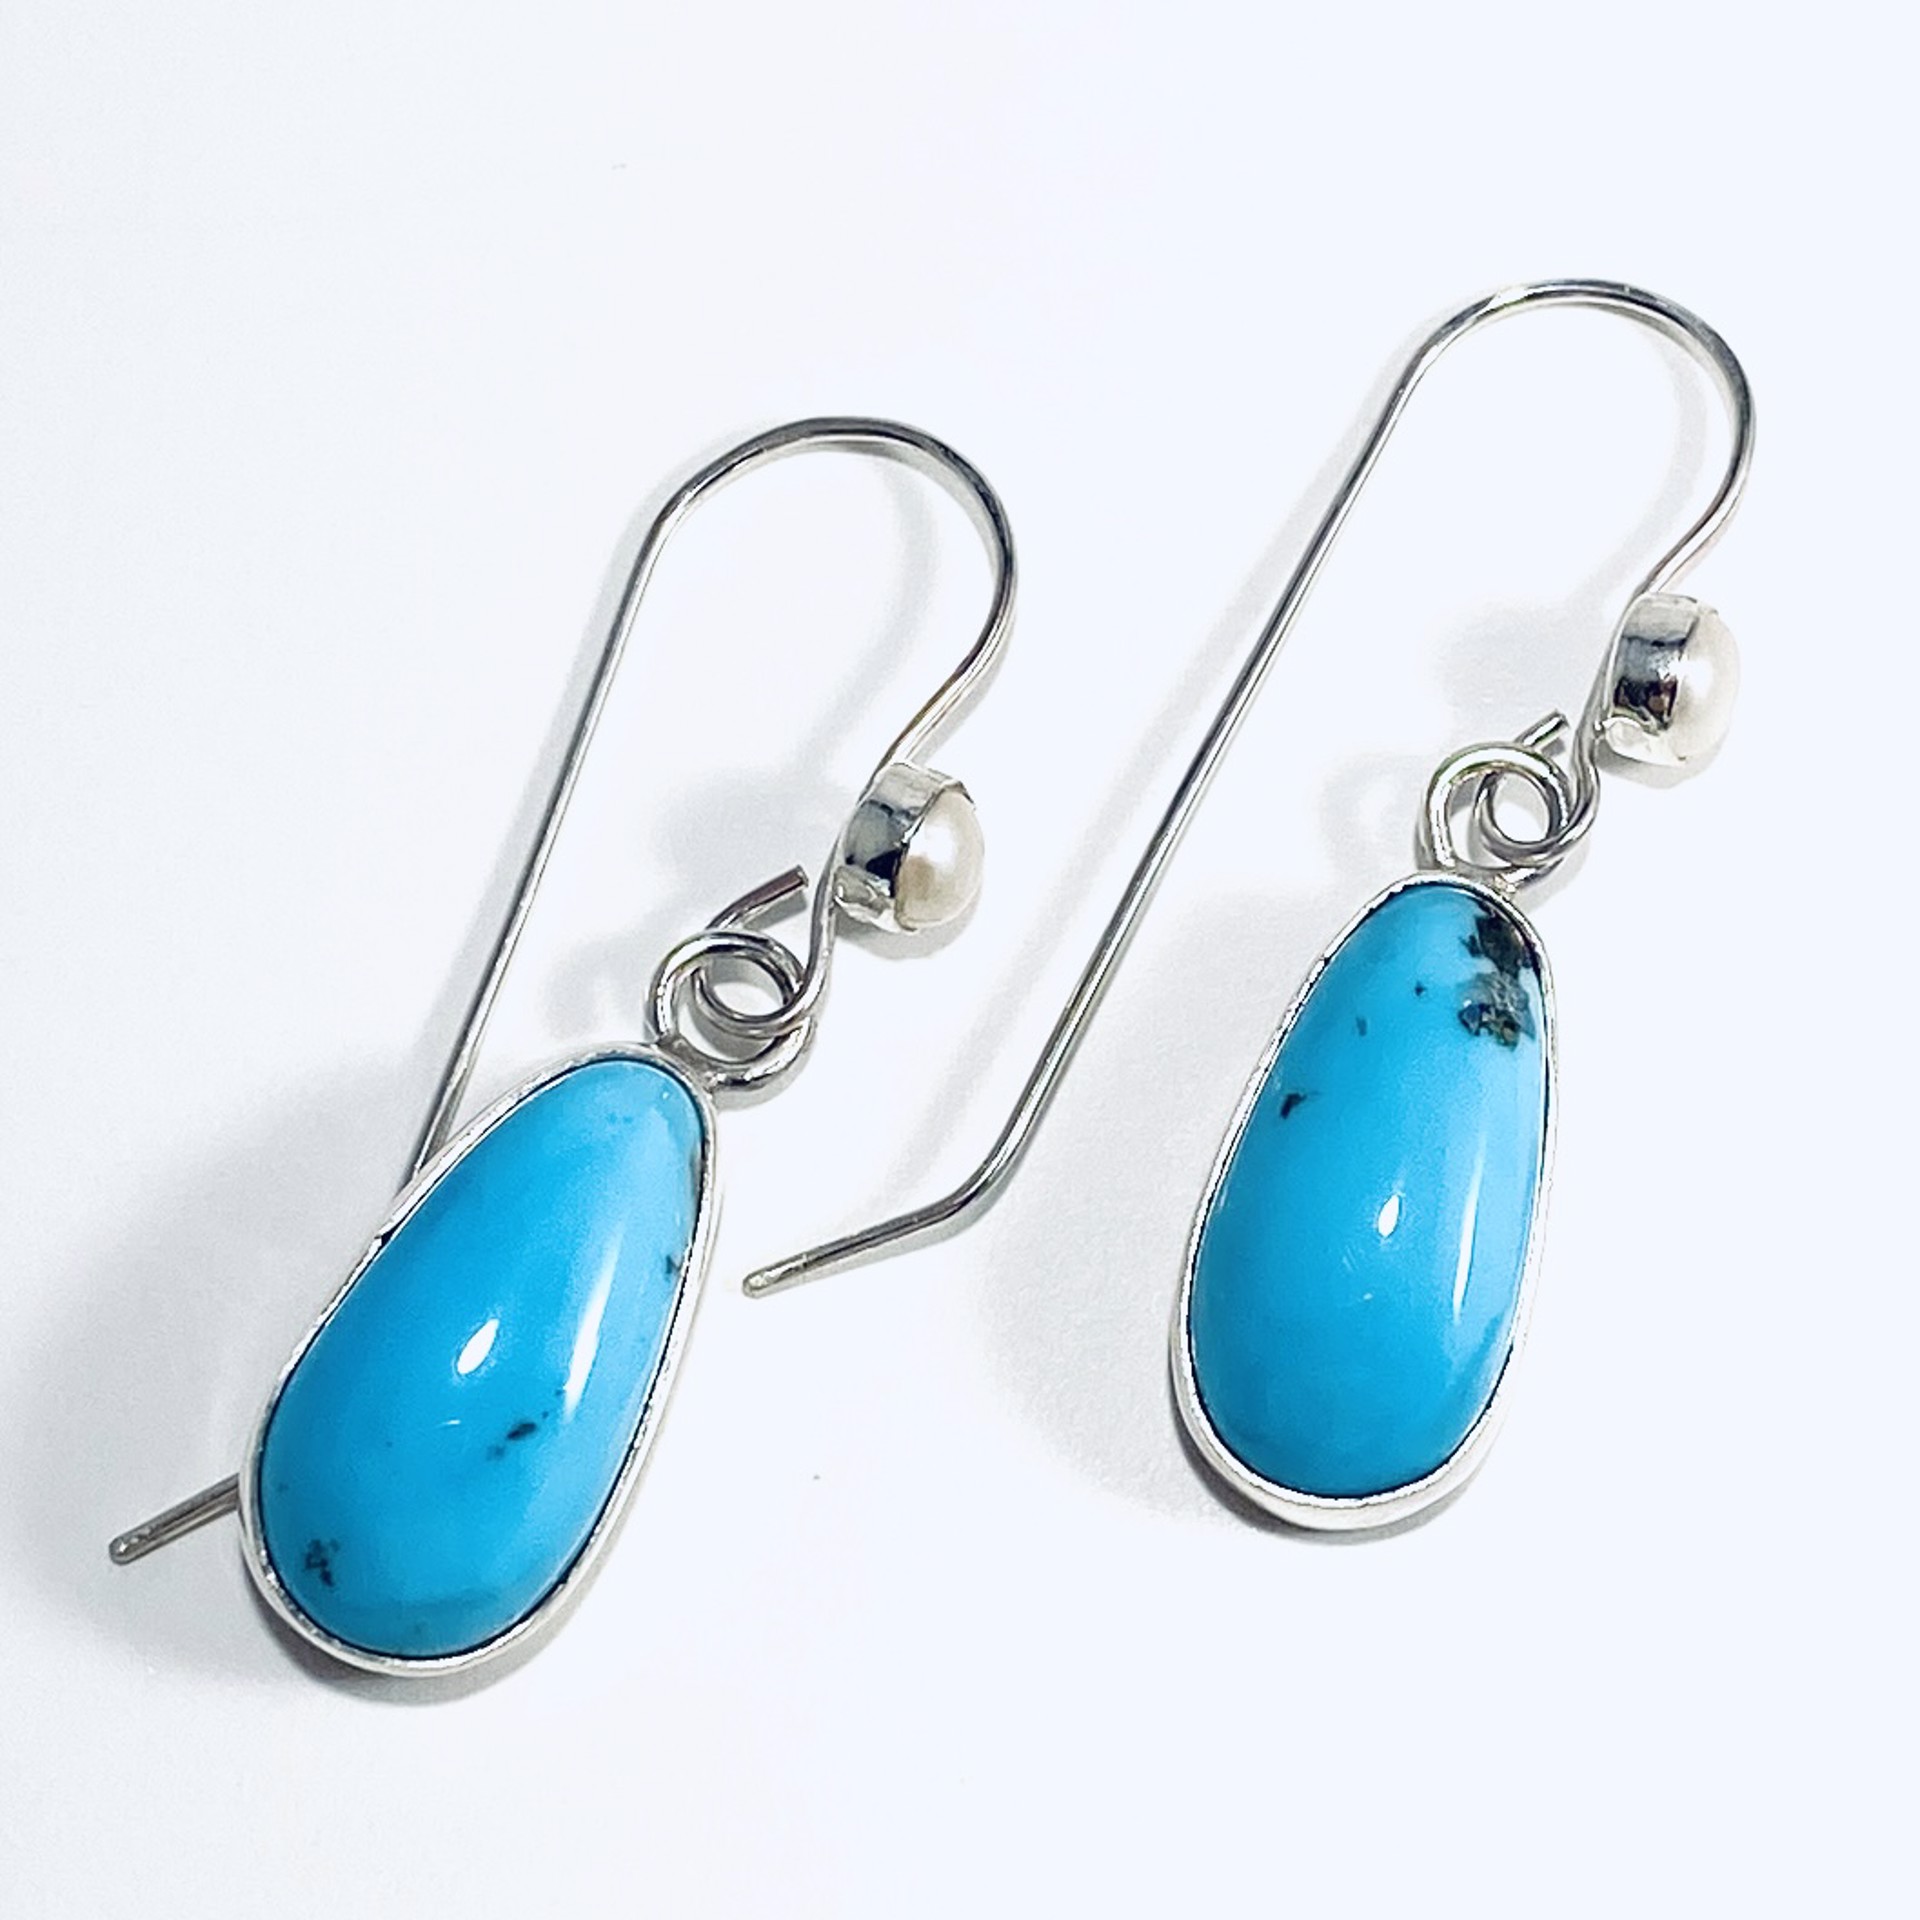 AB23-16 Oval Campo Frio Turquoise Pearl Accent Earrings by Anne Bivens